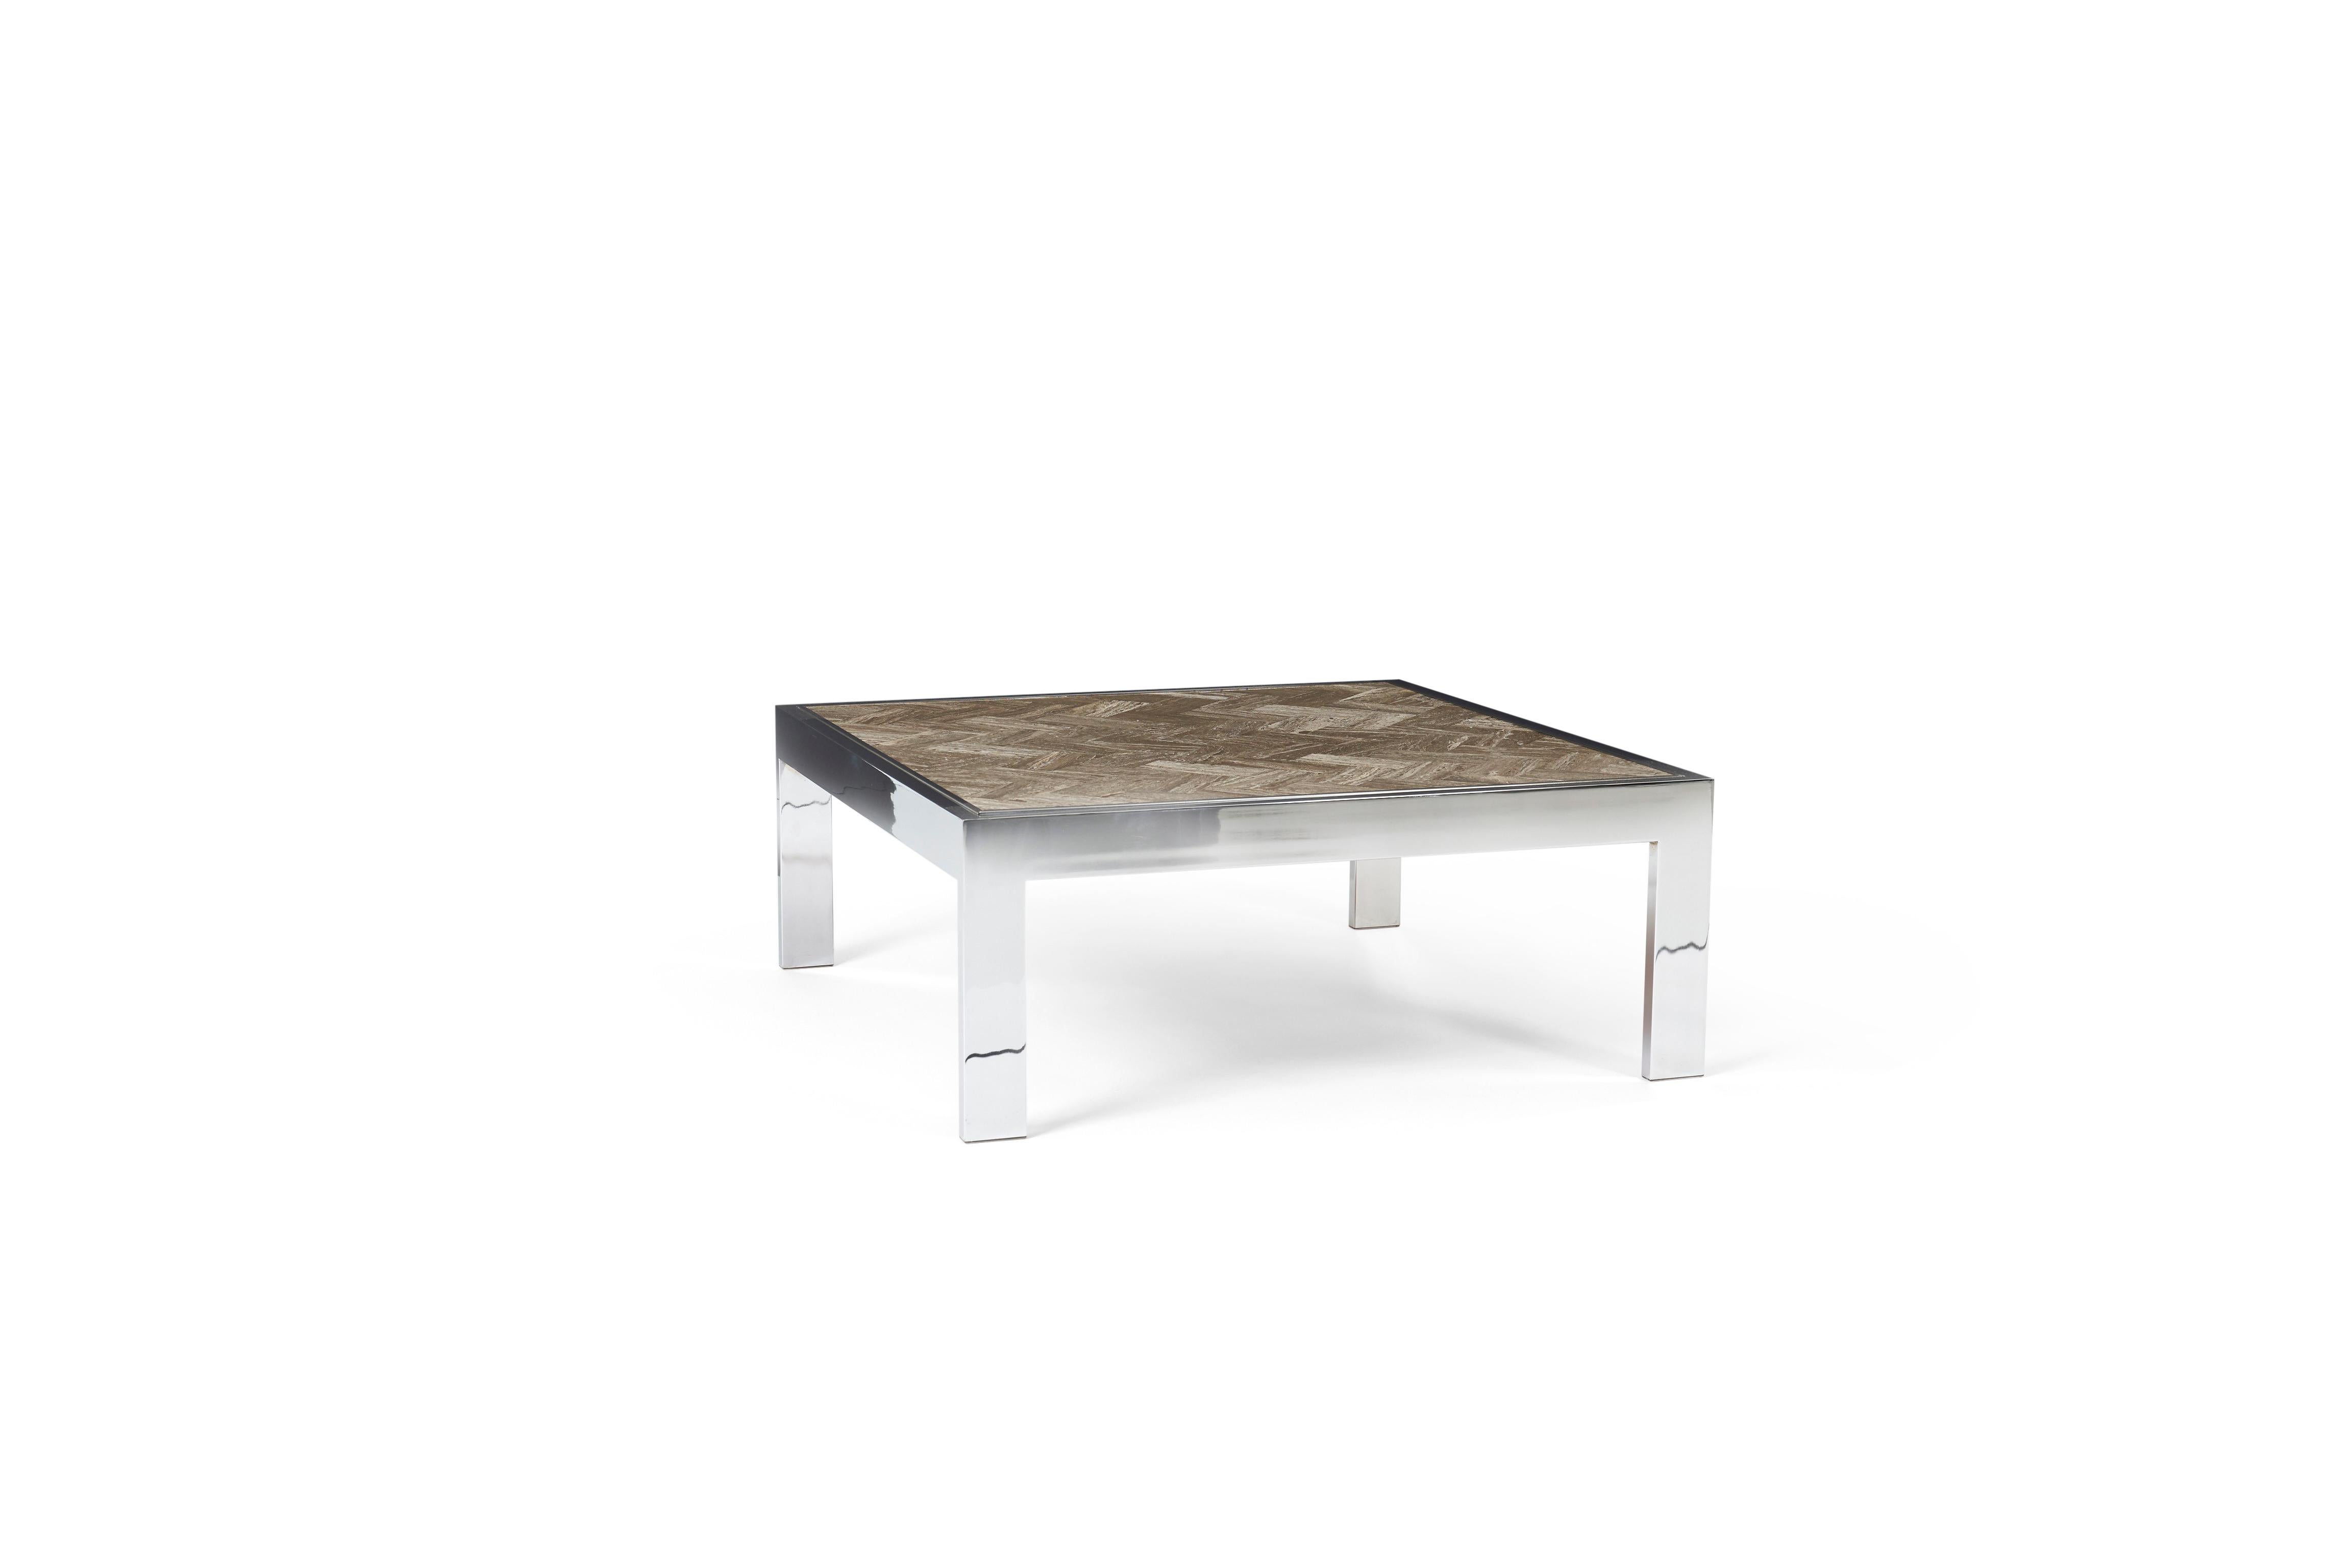 Chrome frame cocktail table with tessellated marble top. Designed by Leon Rosen for Pace.